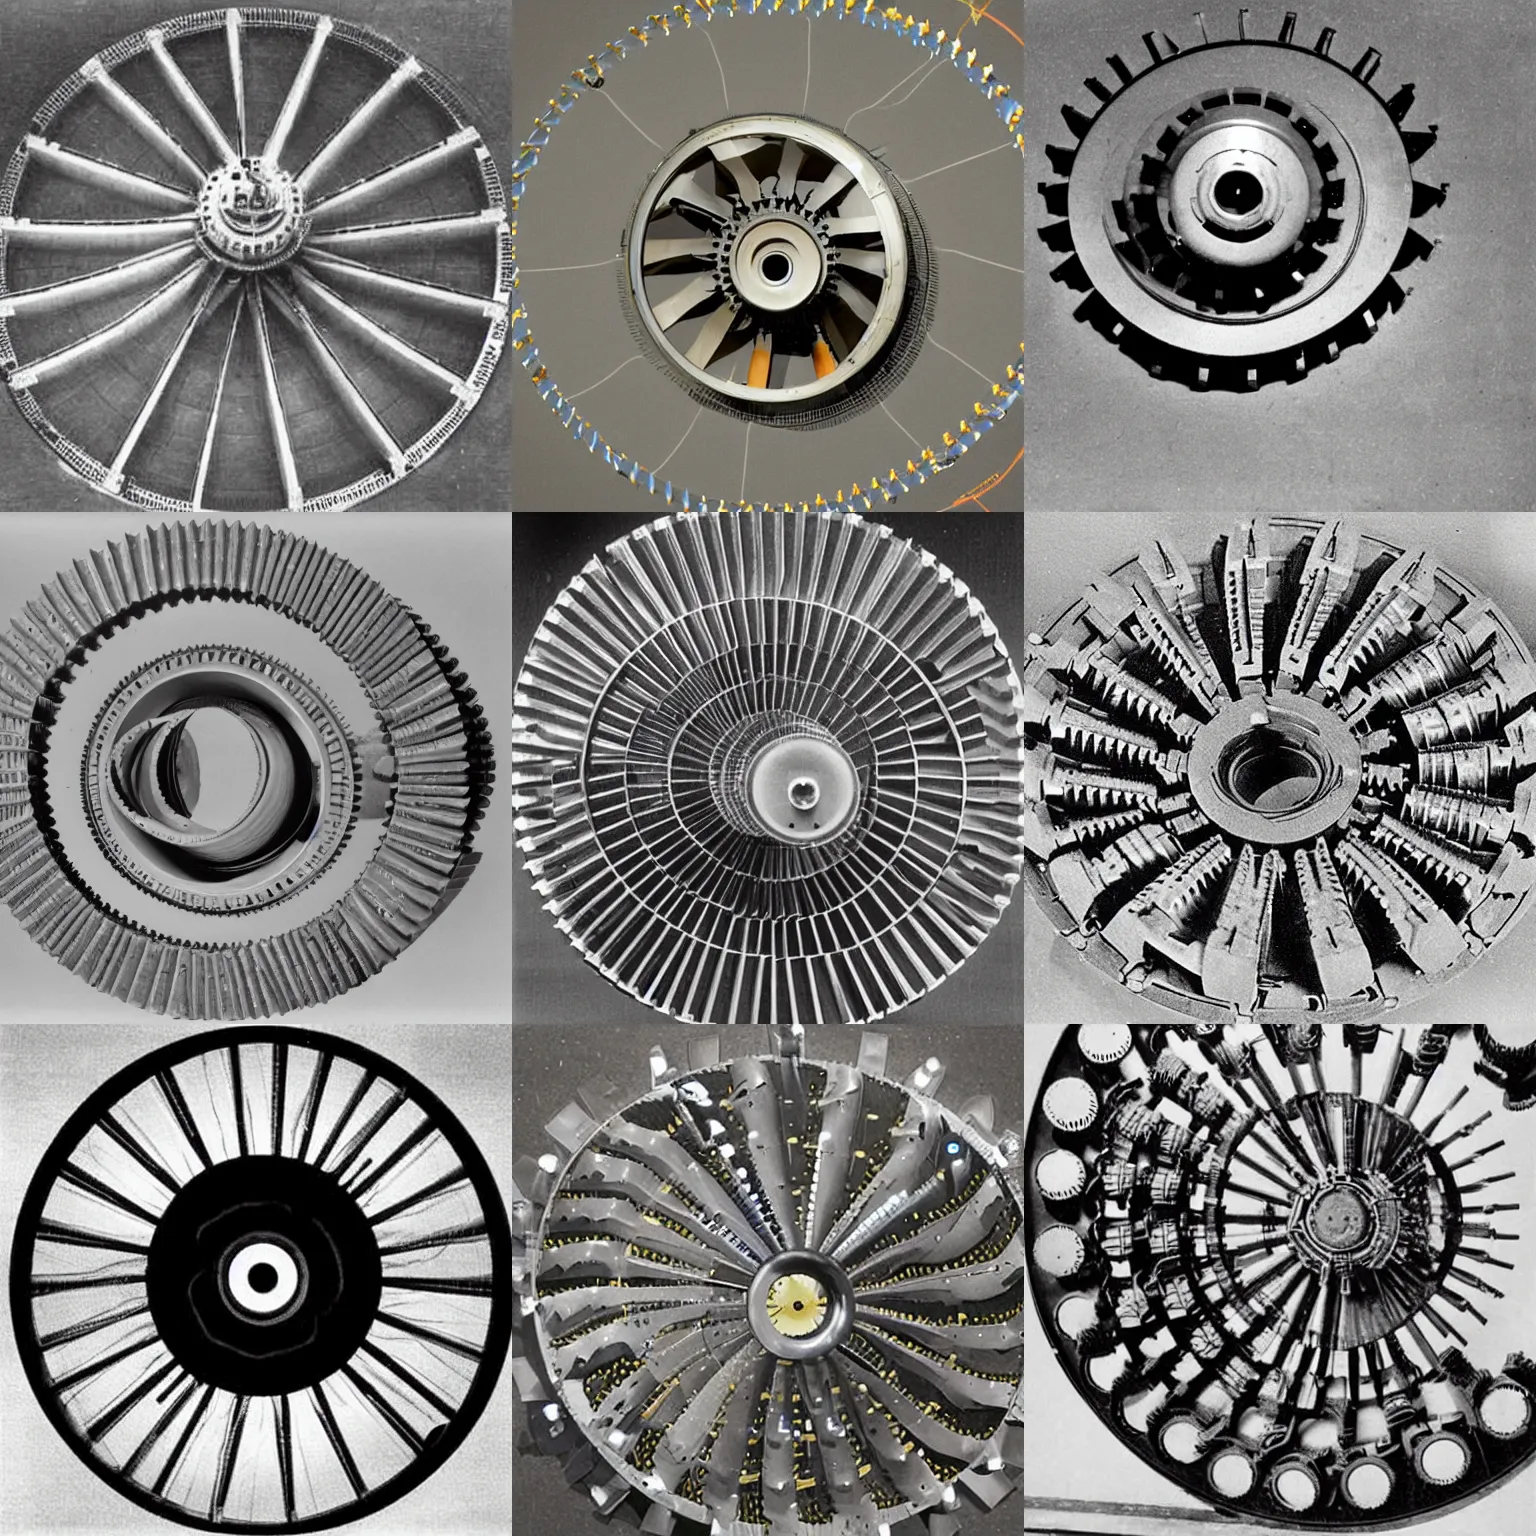 Prompt: This plane was filled with an infinite number of country-sized circular interlocking gears which were habitable on one or both sides. These great flat wheels were at least 1,000 miles in diameter and had teeth that meshed at right angles, all turning slowly in synchronicity. Each disk had its own gravity that operated in a sphere circumscribing it exactly and pulling normal to the top and bottom surfaces. The void between the gears was filled with air, allowing easy flight. Outside a gravity sphere, objects would feel only very weak attraction to nearby disks